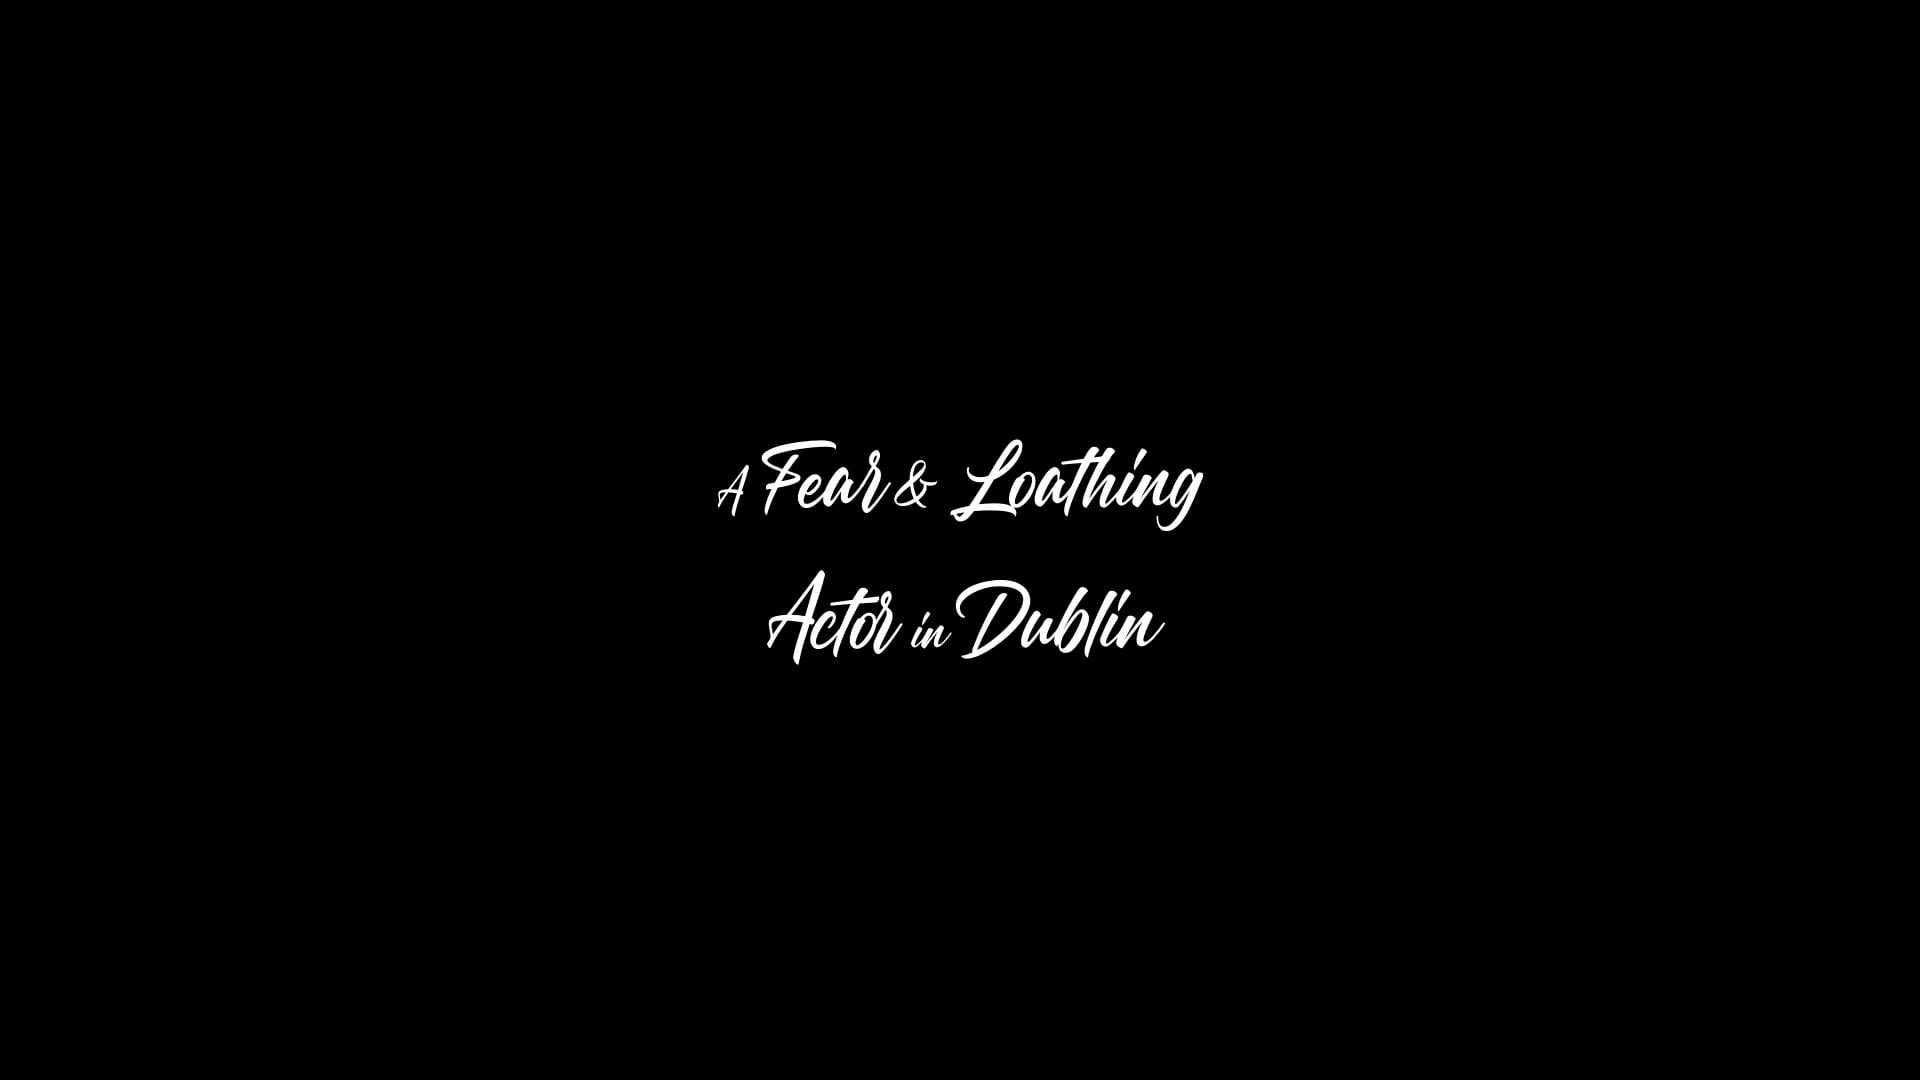 Teaser video for the play 'A Fear And Loathing Actor in Dublin'